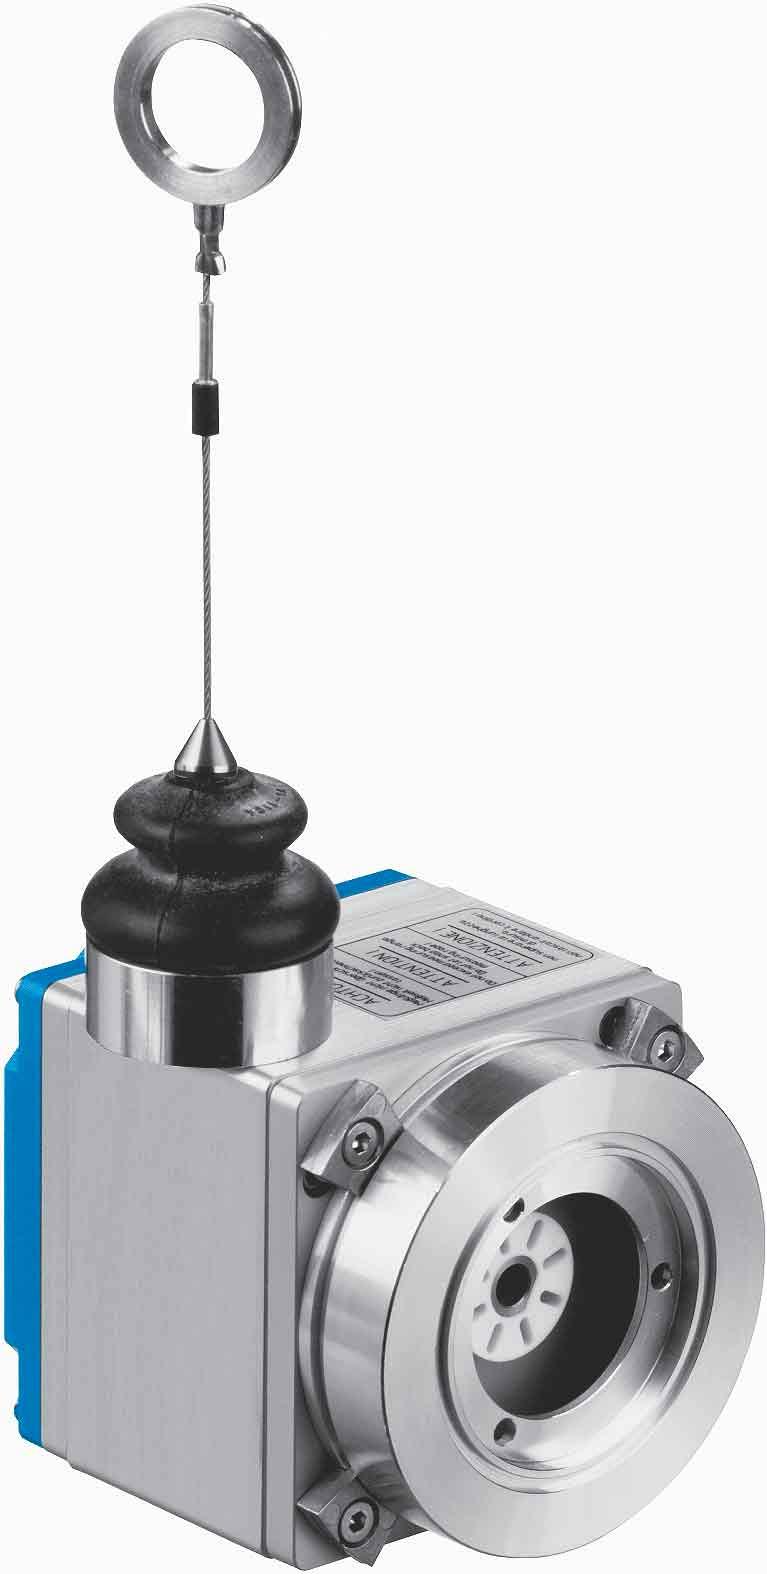 Accessories wire draw mechanism MRA-F up to 0 m Linear path measurement using a wire draw mechanism Easy mounting of the encoder High-precision measurement drum Extremely stable spring return Highly